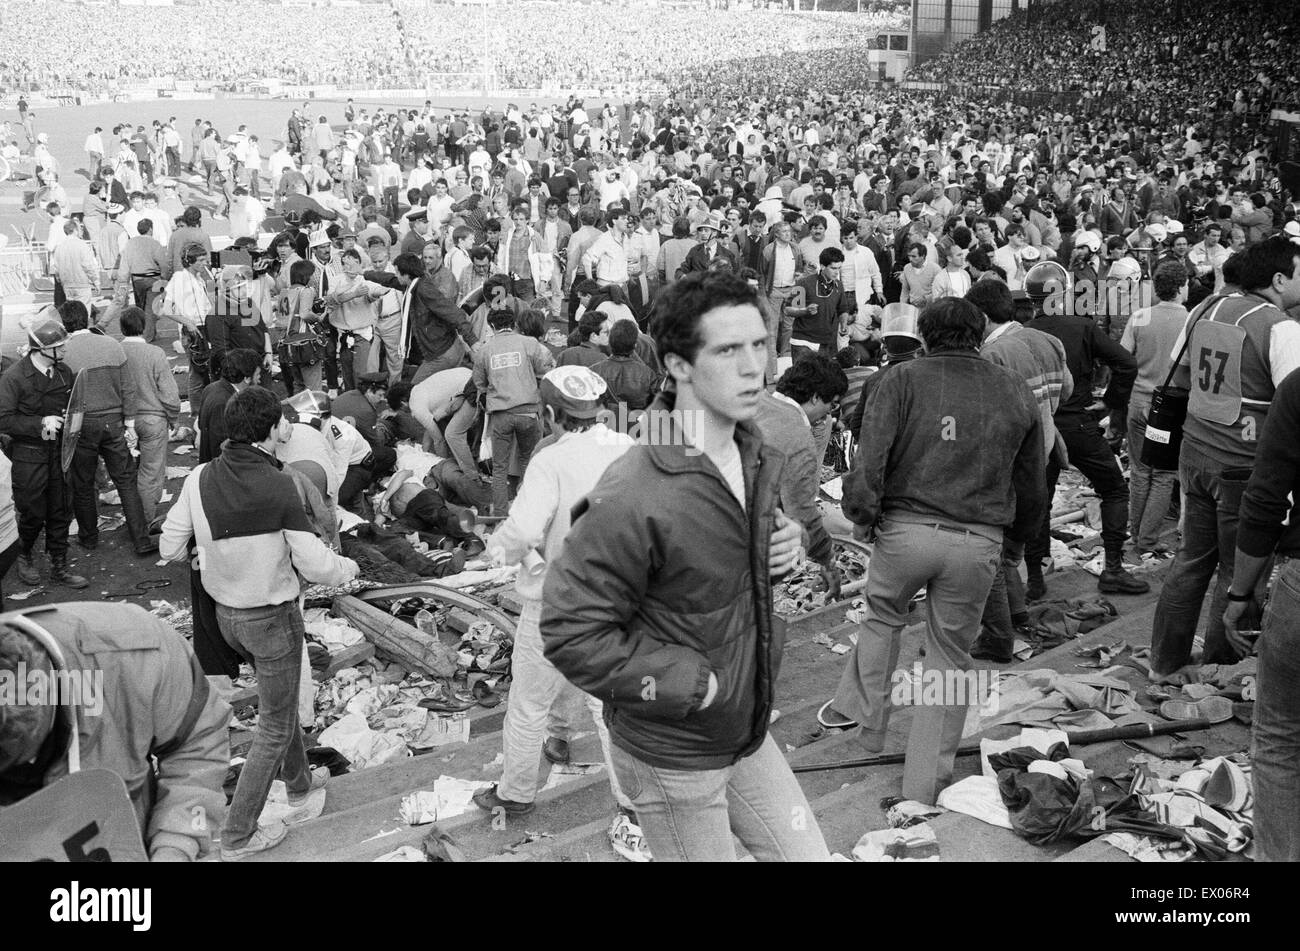 WARNING : GRAPHIC CONTENT Juventus v Liverpool, 1985 European Cup Final, Heysel Stadium, Brussels, Wednesday 29th May 1985. Heysel Stadium Disaster. 39 people, mostly Juventus fans, died when escaping missiles being thrown by both sets of fans across a na Stock Photo